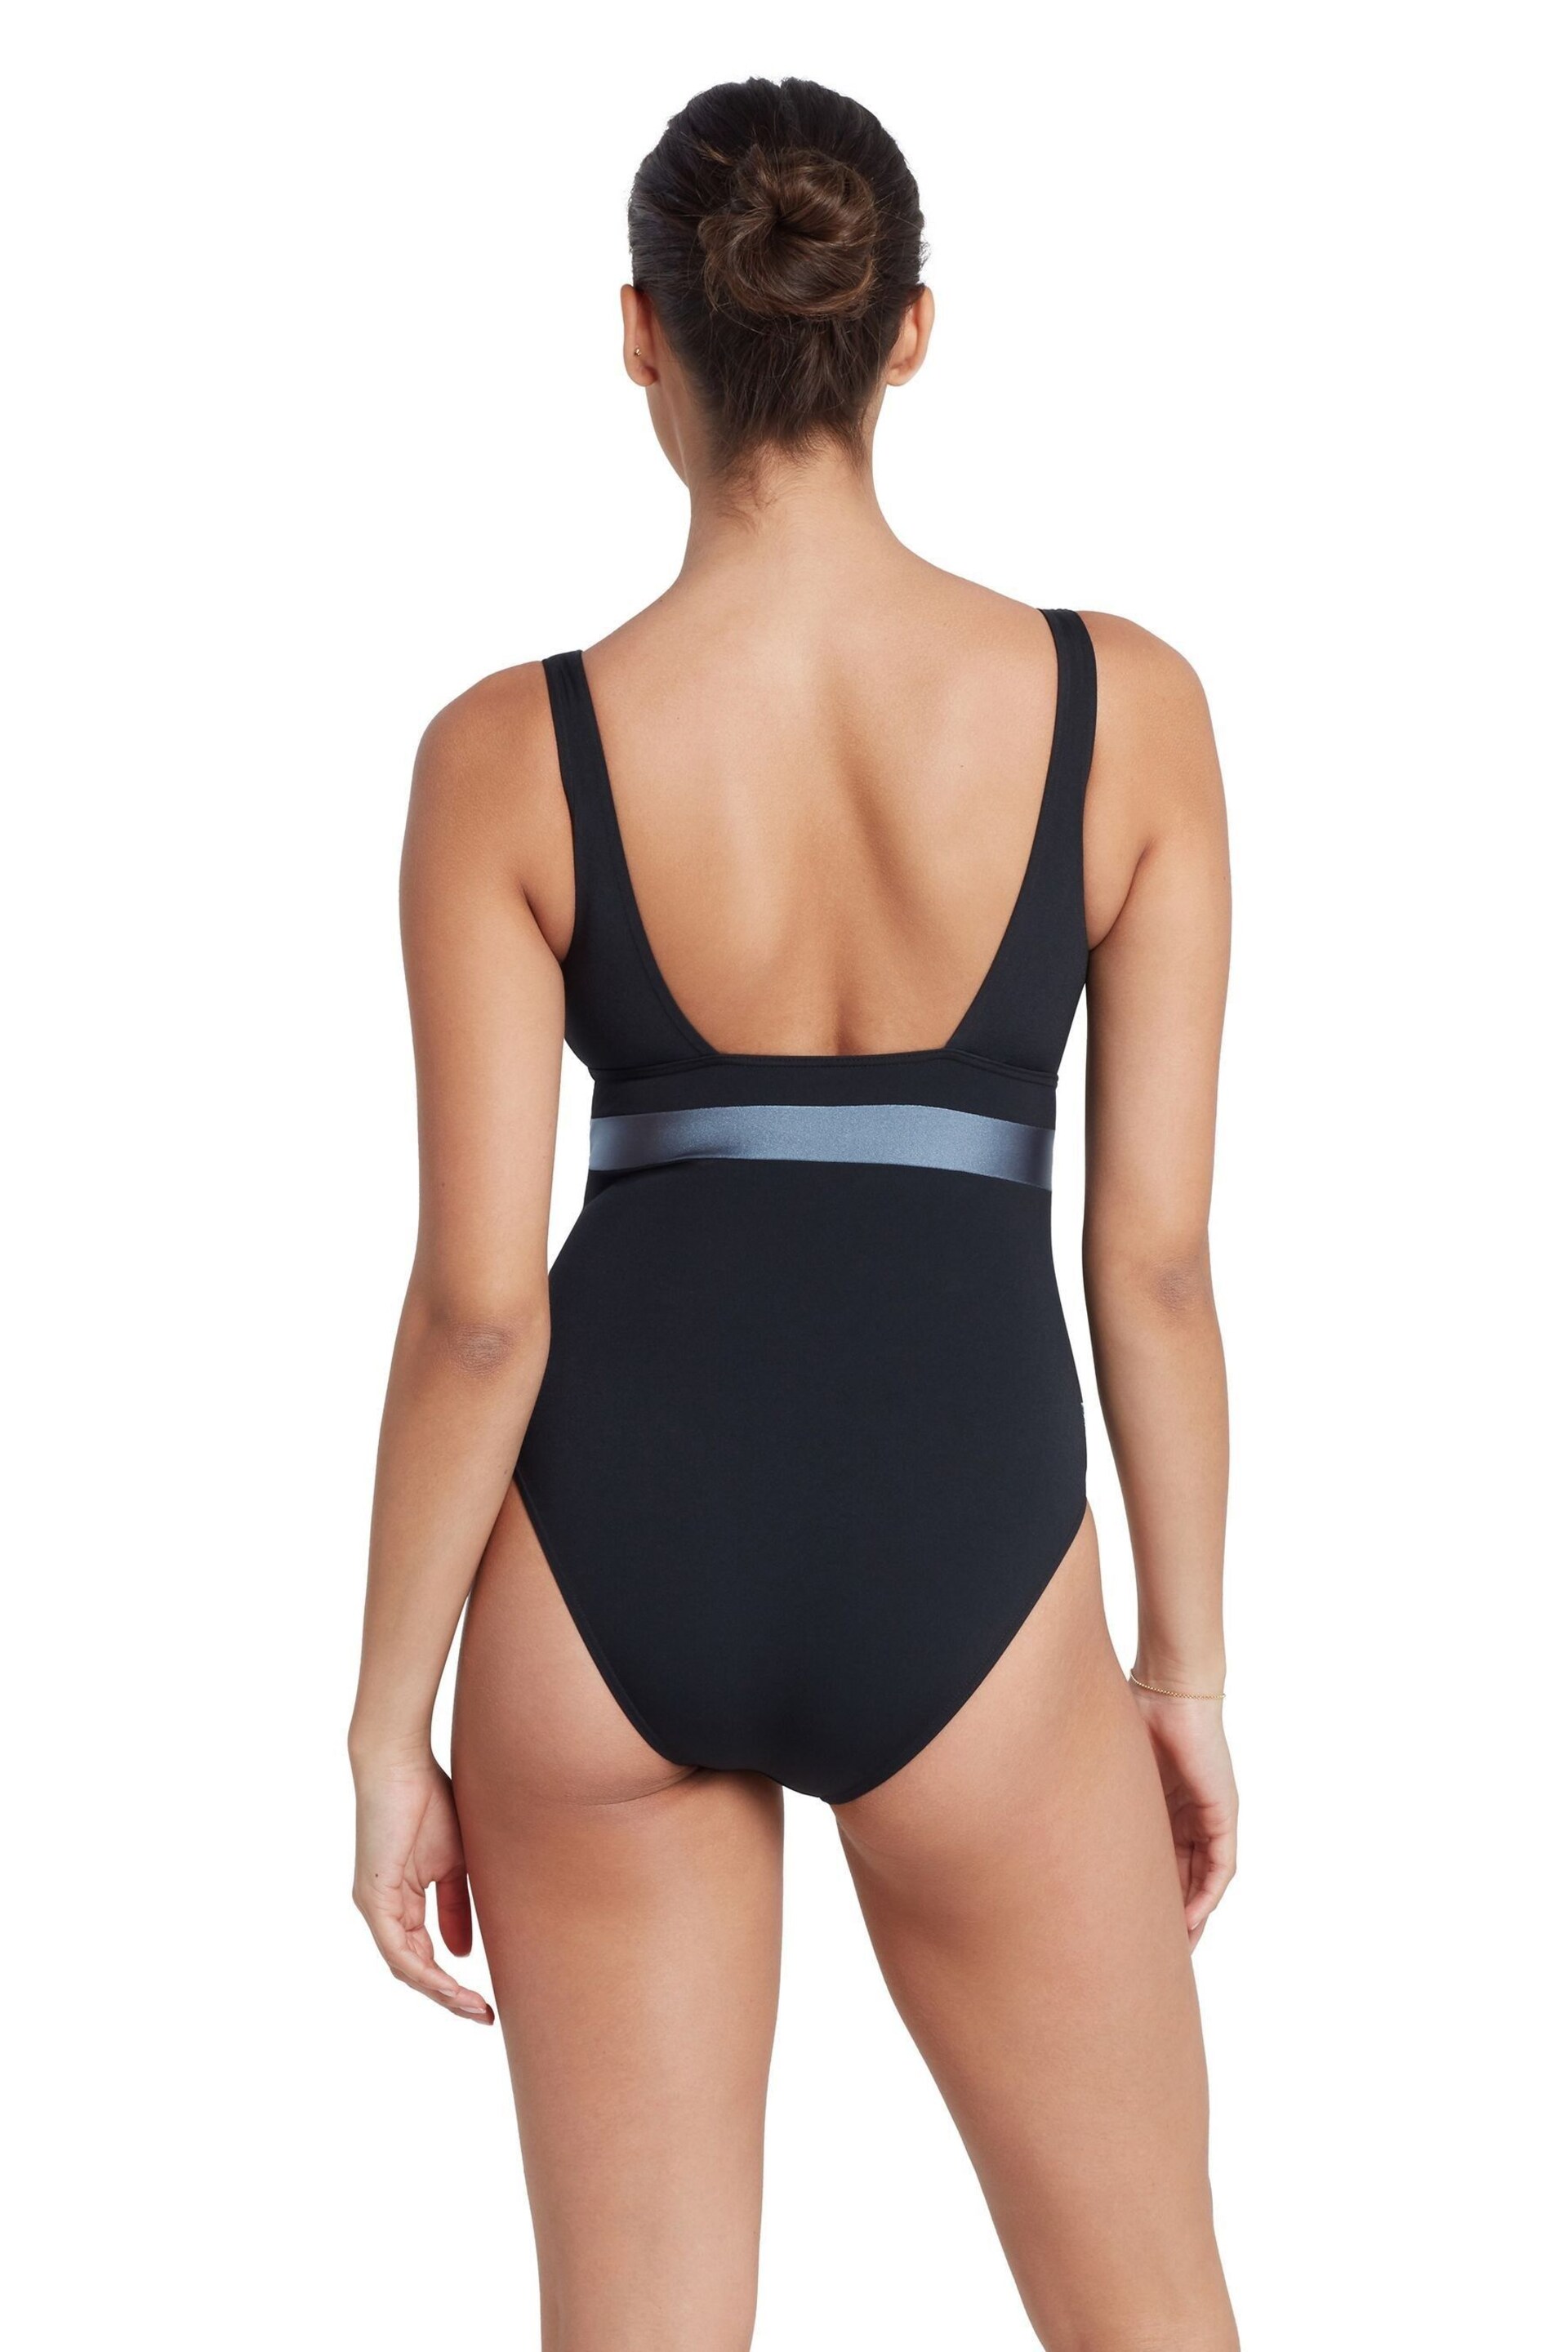 Zoggs Square Back Black Swimsuit With Foam Cup Support - Image 2 of 8